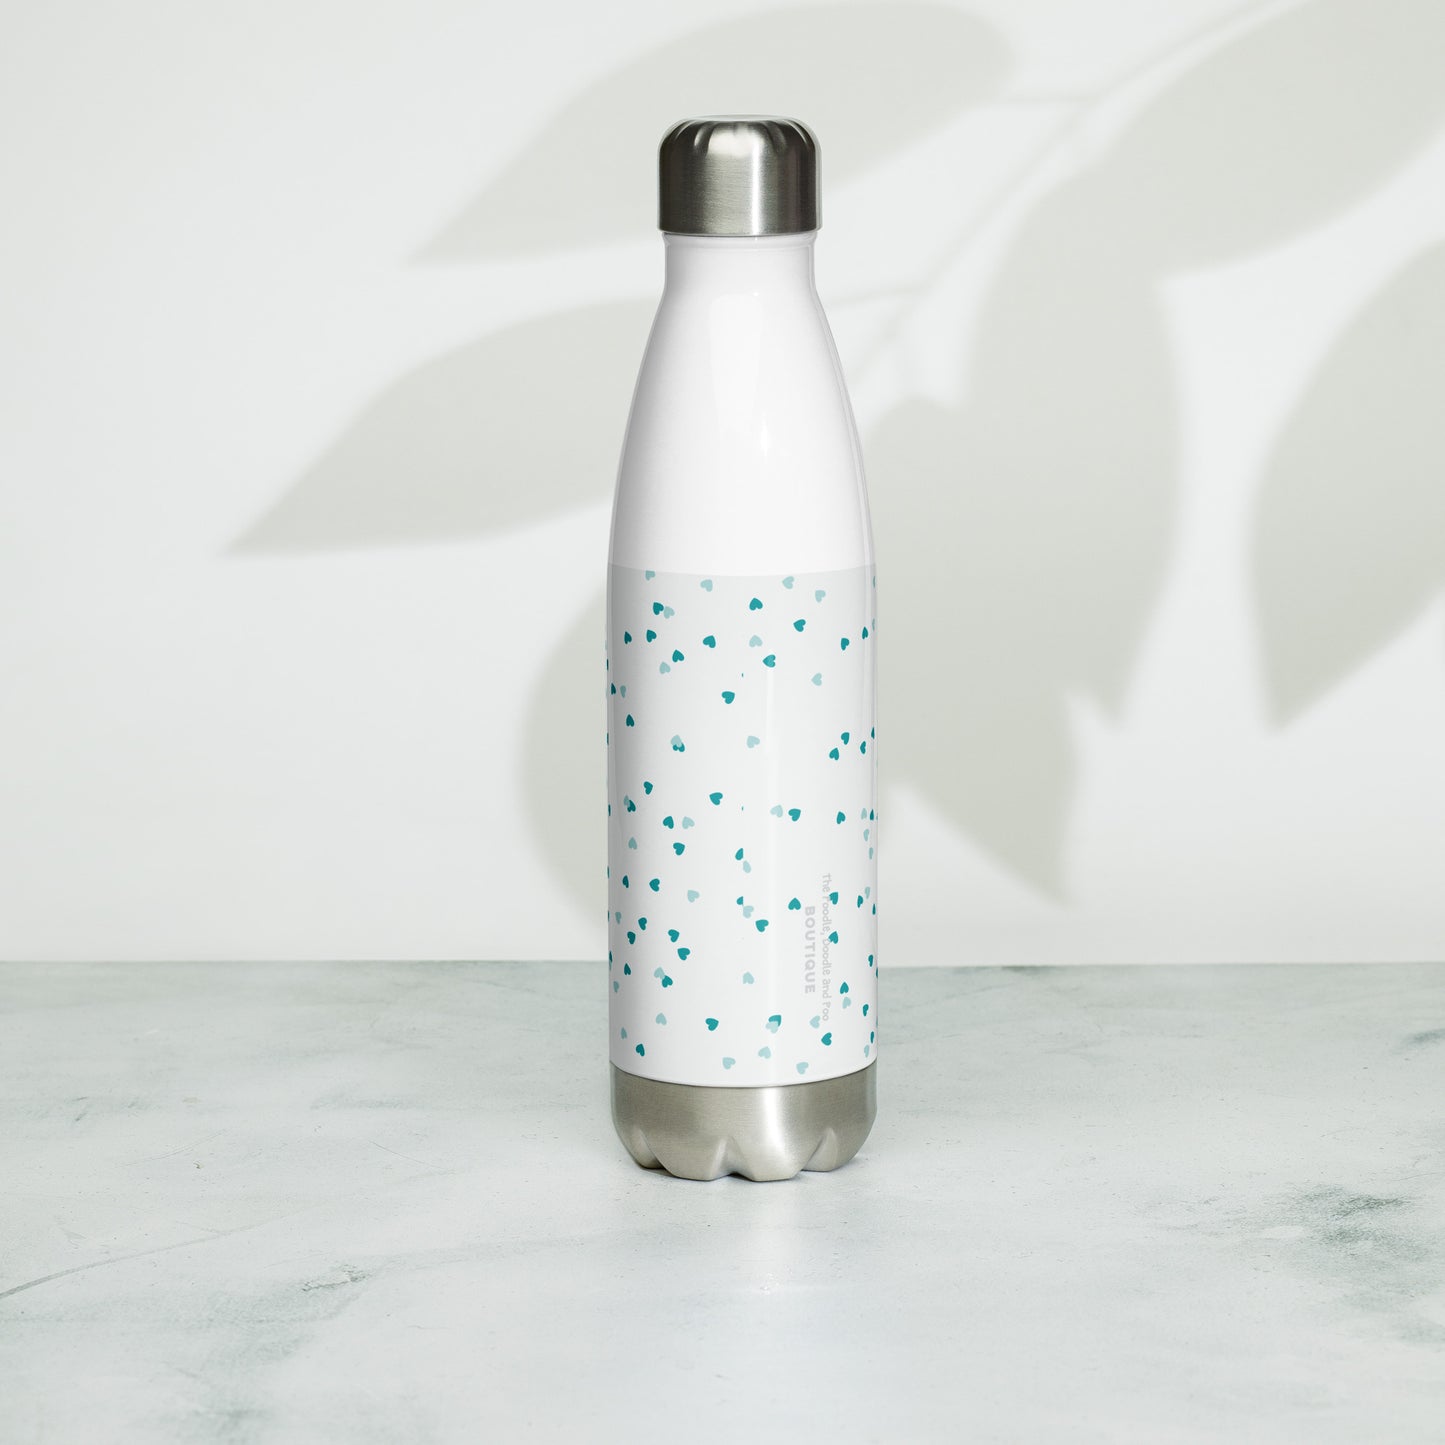 "Love" Stainless steel water bottle - red golden Doodle